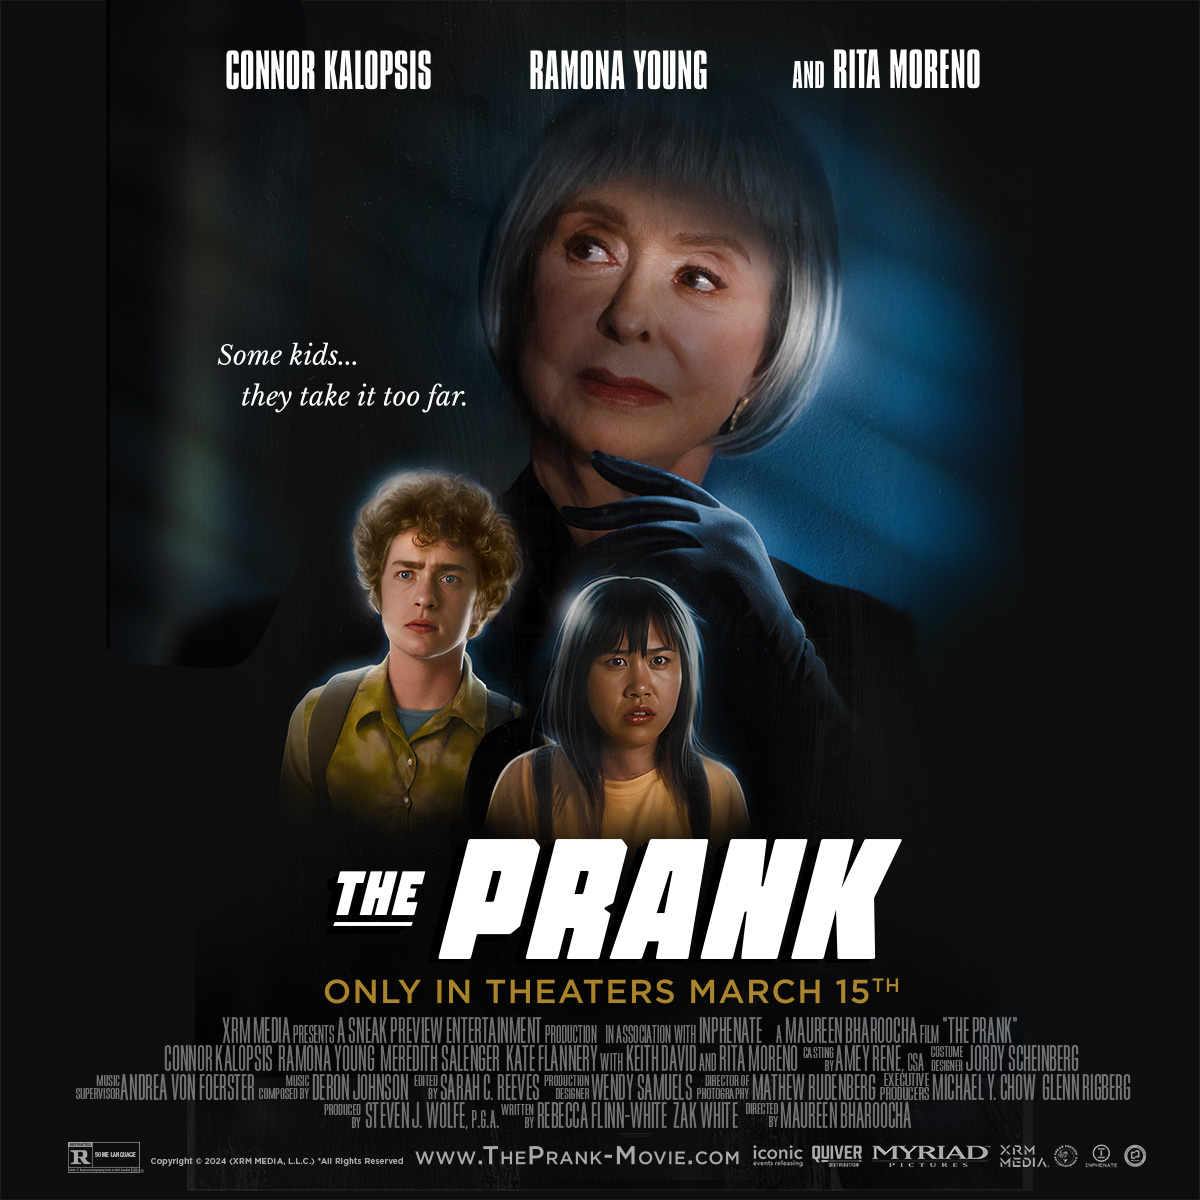 Movie poster for &quot;THE PRANK&quot; featuring actors Ramona Young and Rita Moreno with intense expressions, with two young actors looking worried below